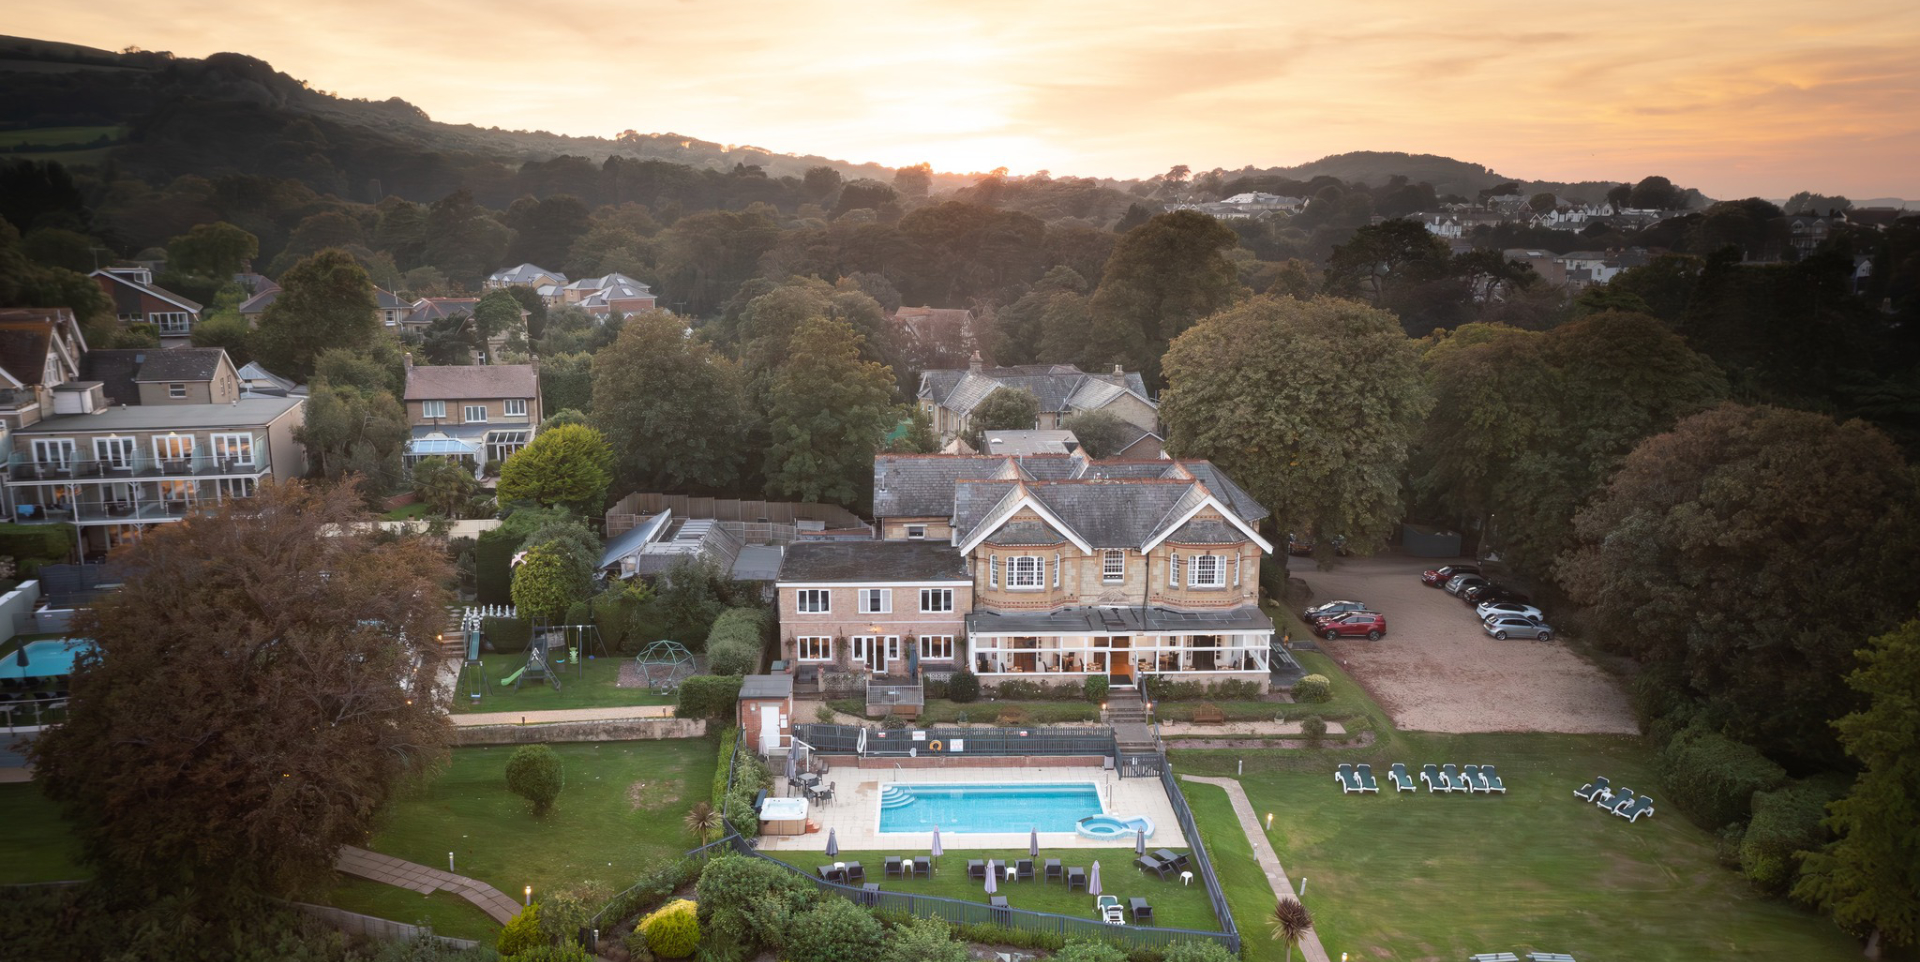 Luccombe Manor aerial shot - from their Facebook page